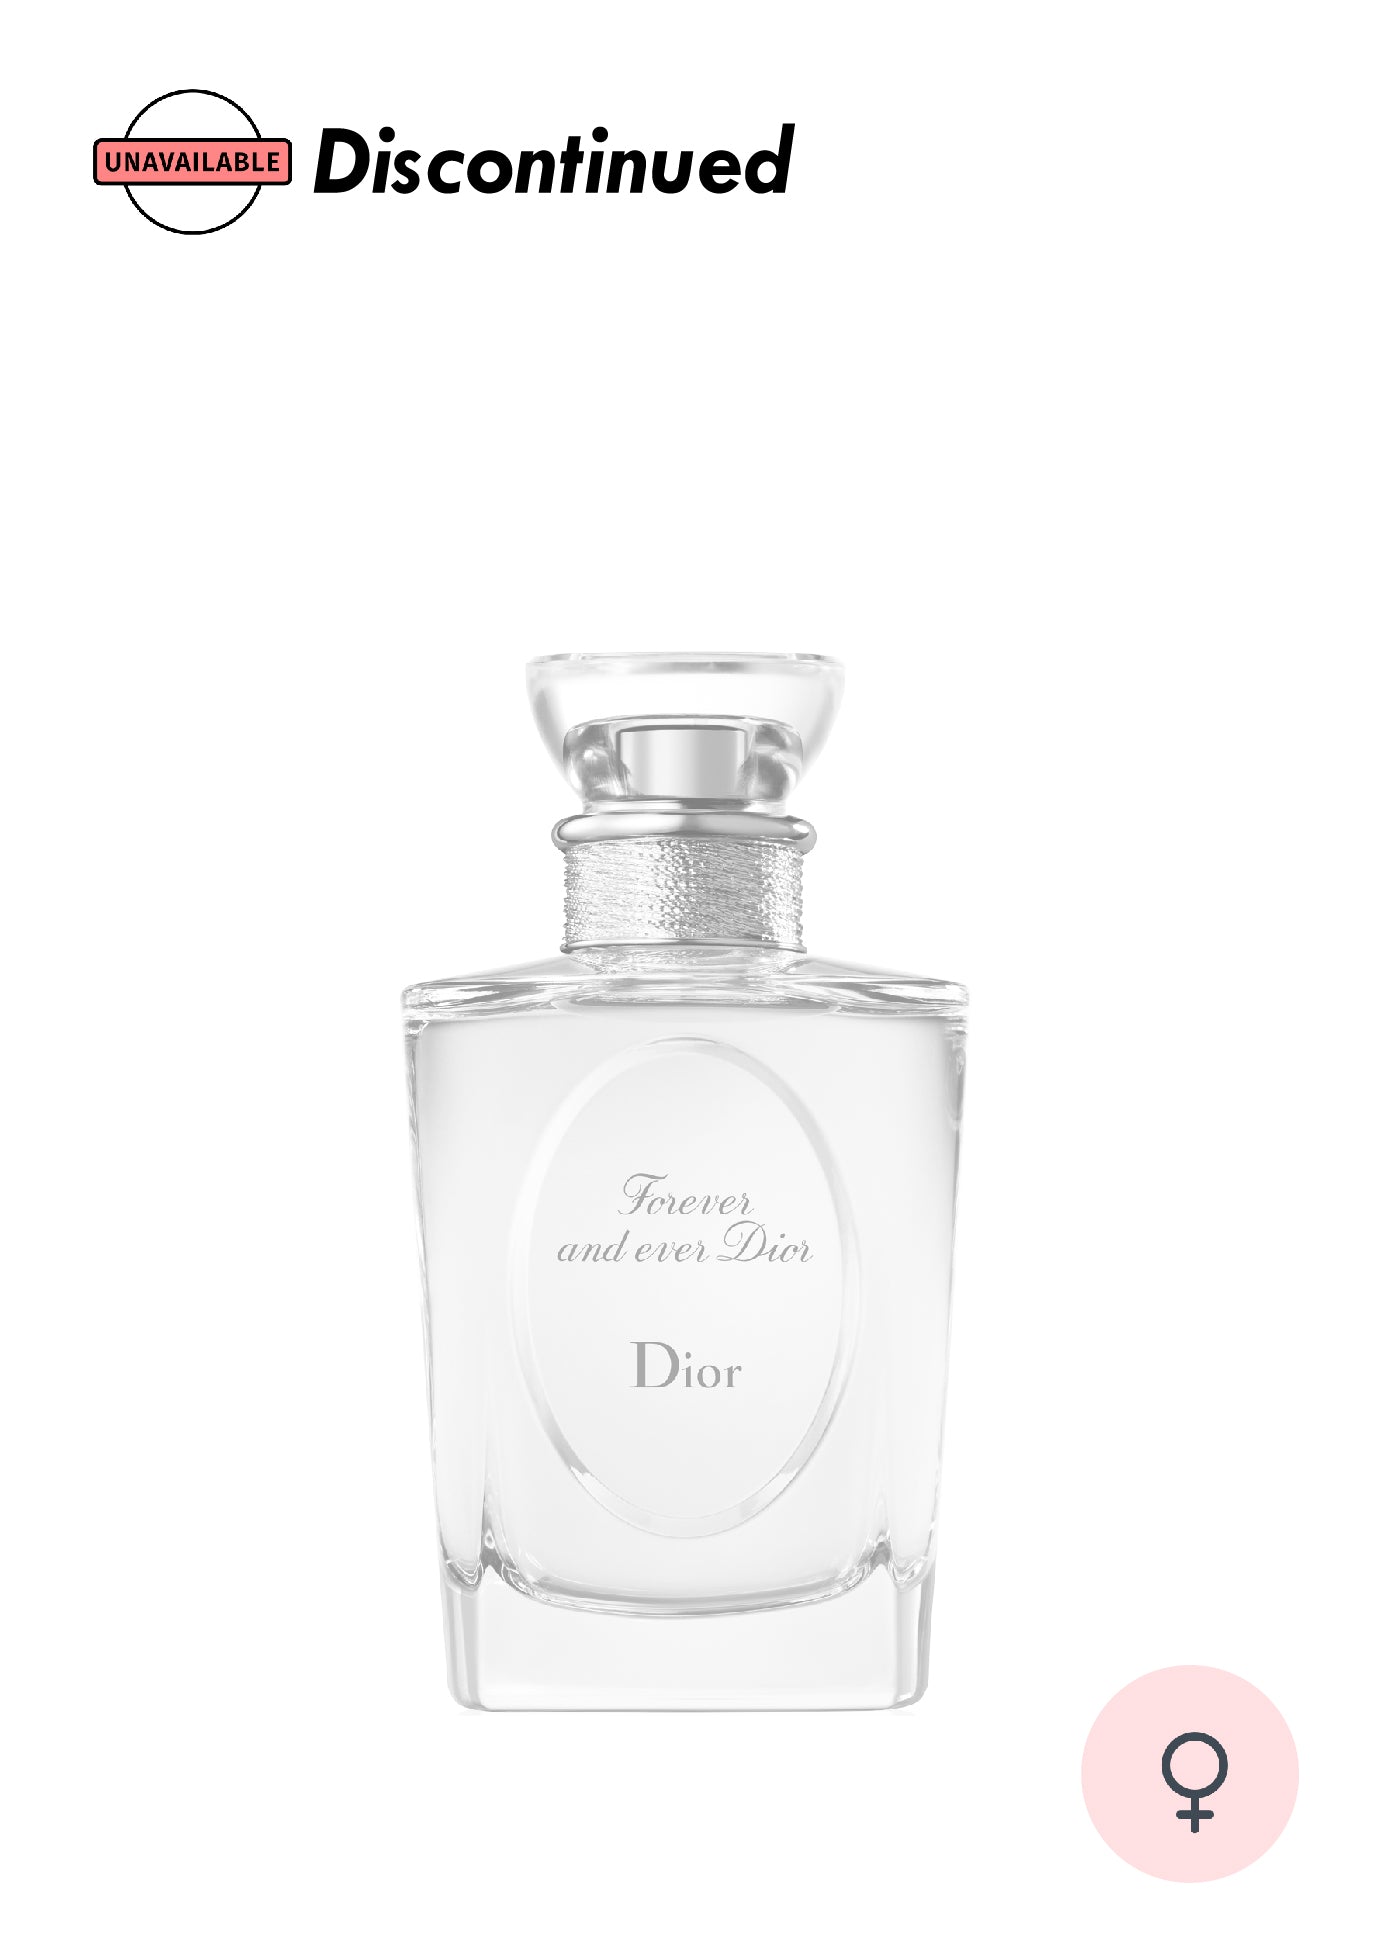 eBay Philippines  Dior Forever and Ever Dior Perfume 100ml PHP 5800 CLICK  THIS LINK TO SHOP  httpbitly2HWeVJ2  Facebook